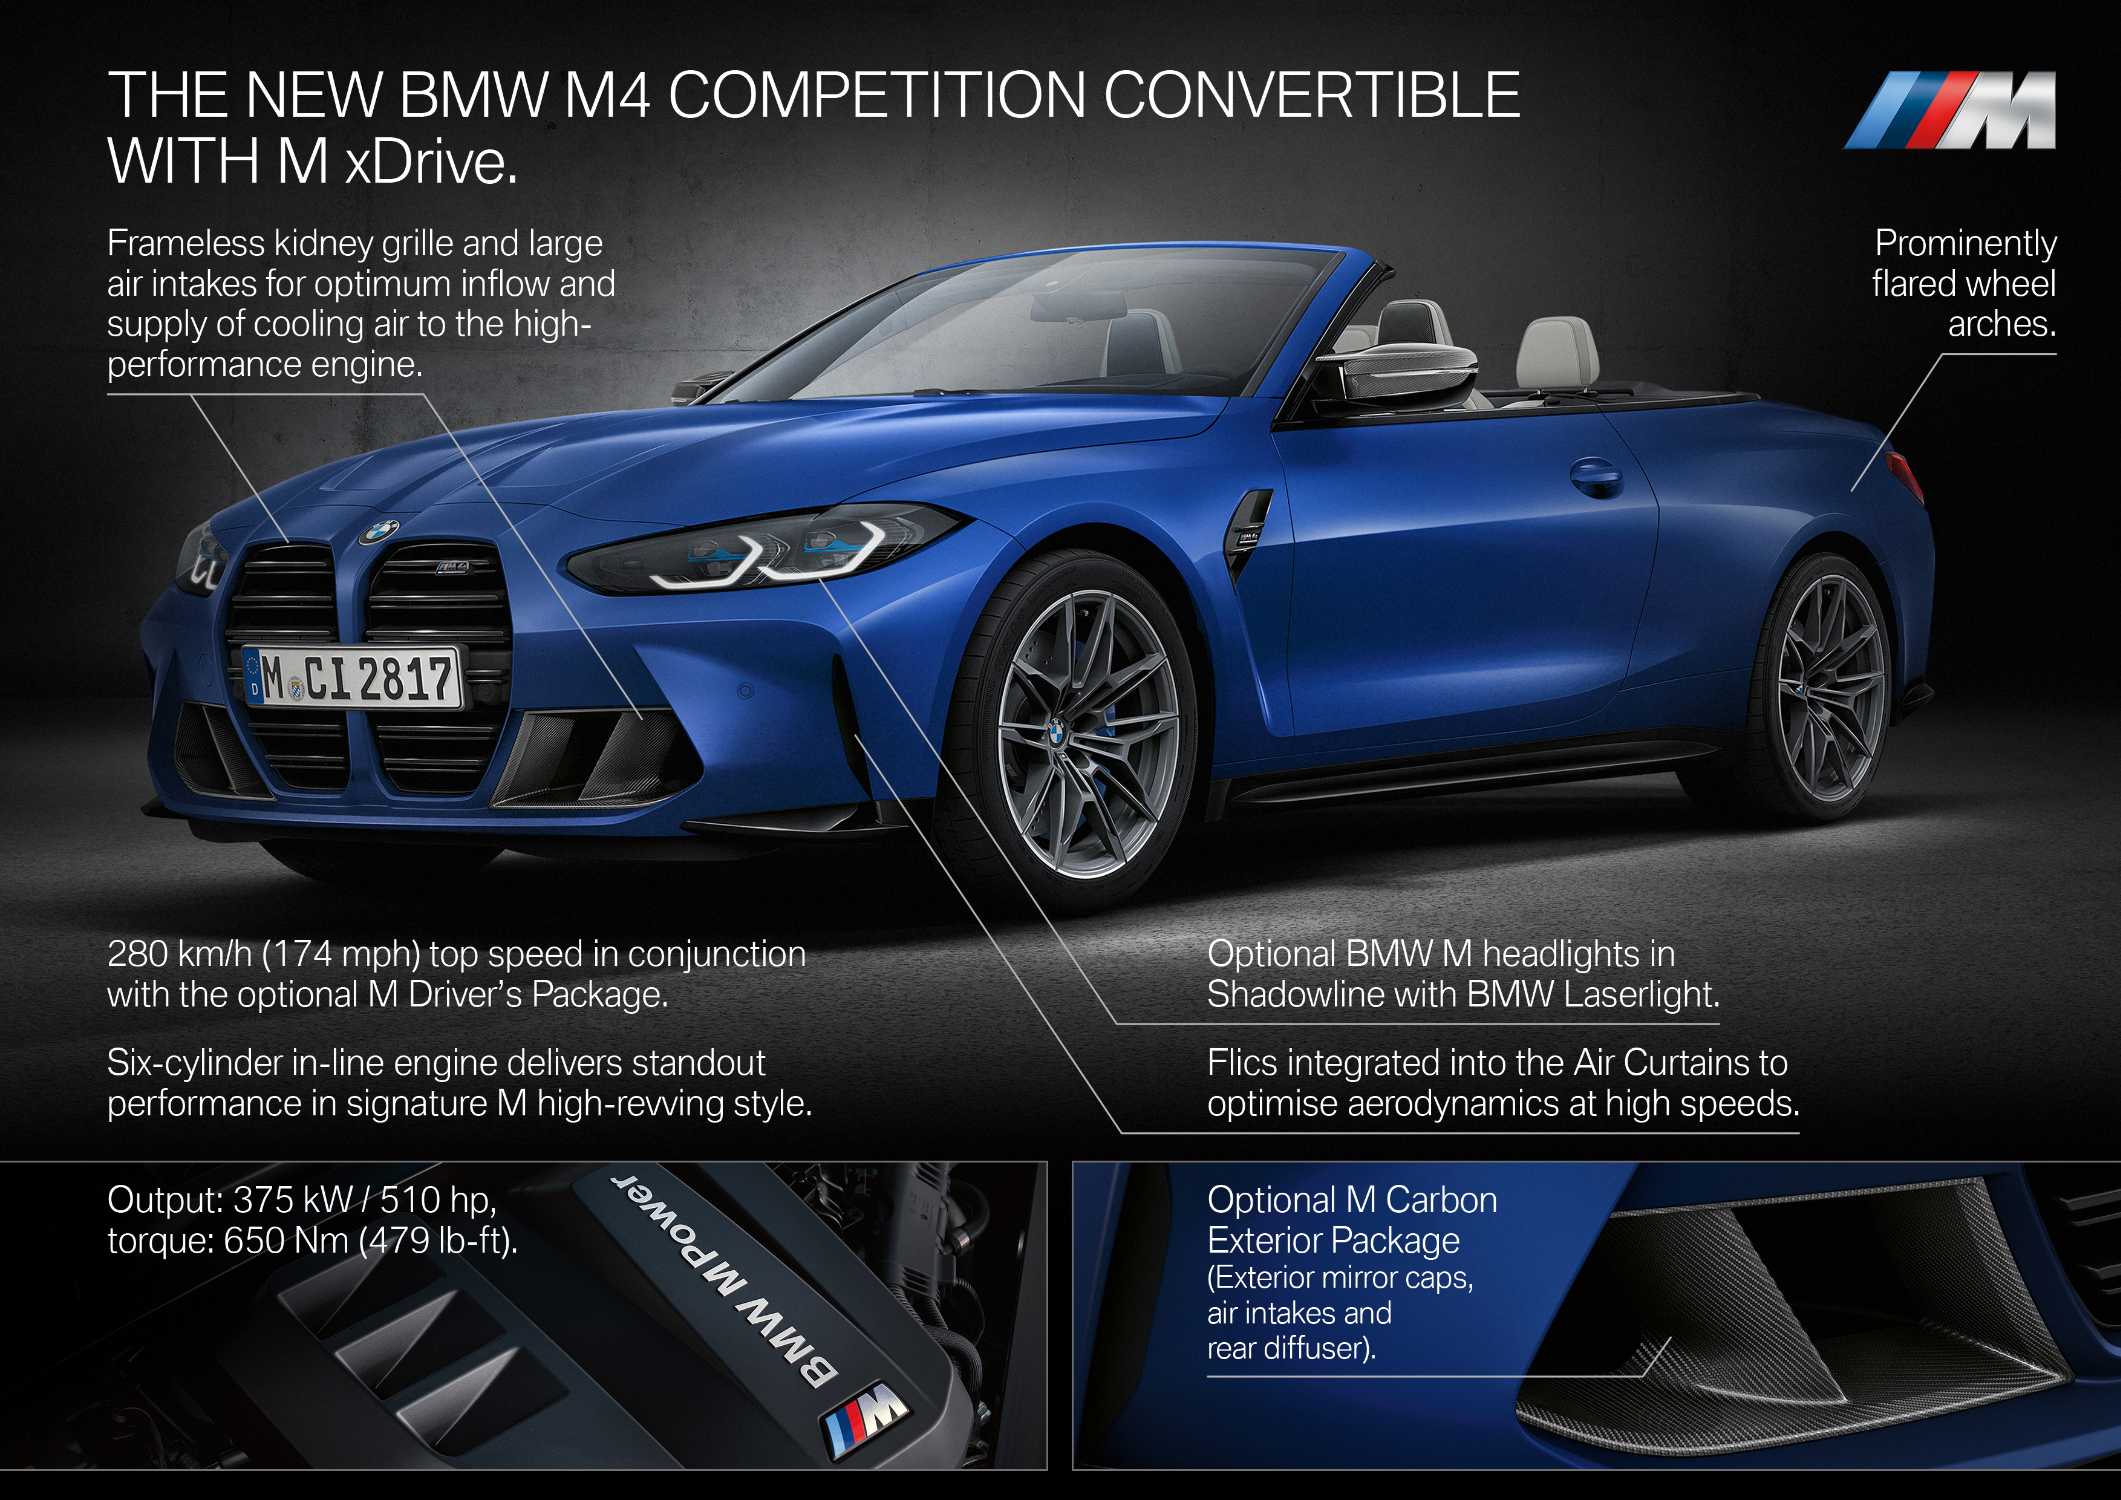 The new BMW M4 Competition Convertible with M xDrive (05/2021).